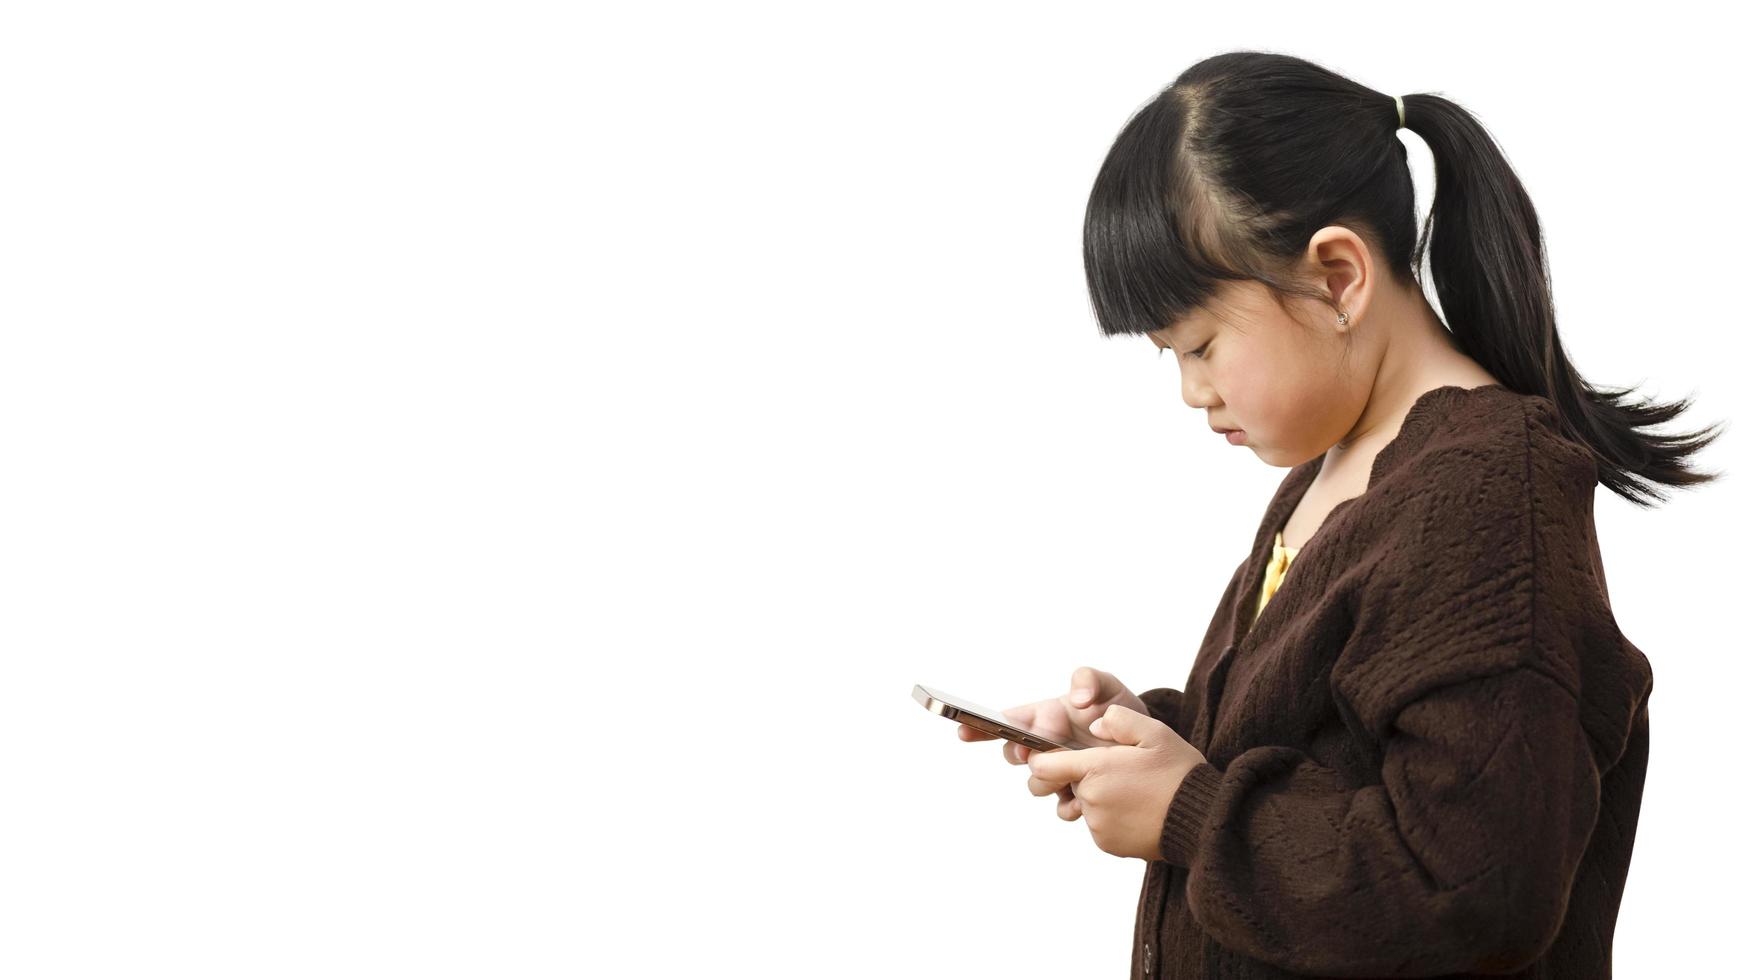 Asian Child is watching the phone on the  white background, using a mobile phone for a long time hurts her eyes and has an aggressive atmosphere. Concept danger for children's mobile phones concept. photo